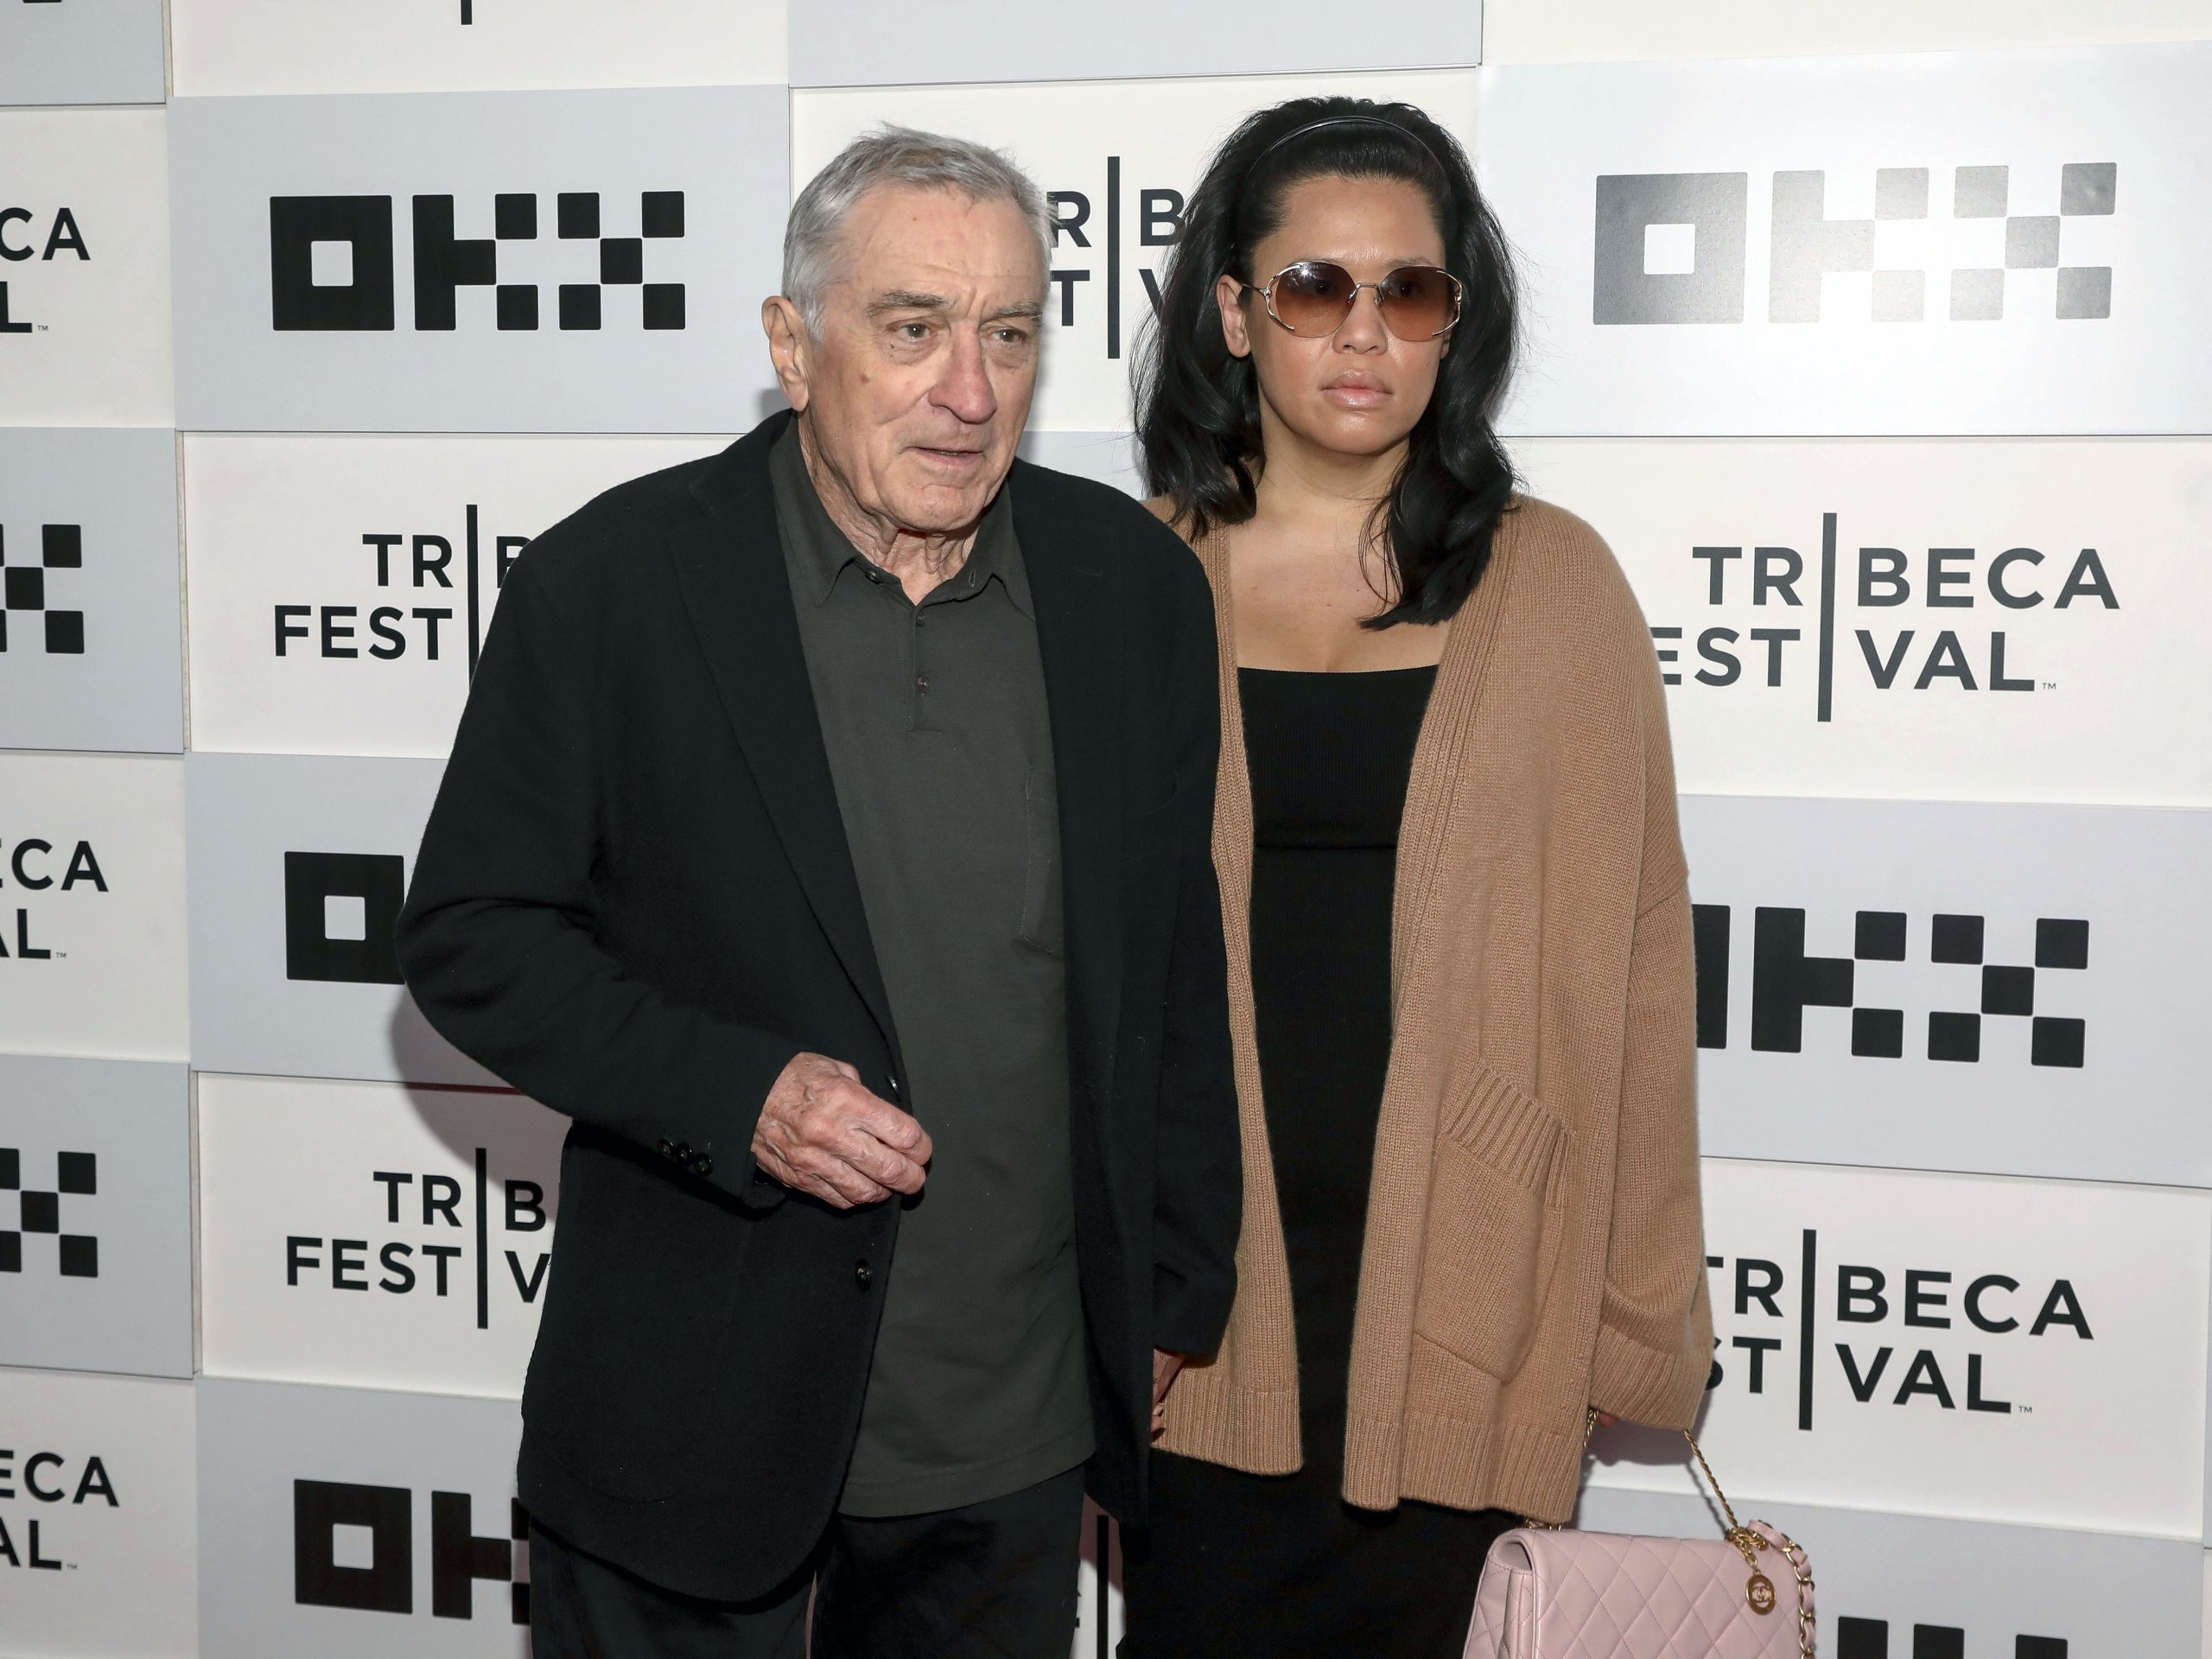 Actor Robert De Niro, left, and Tiffany Chen attend the Tribeca Festival opening night premiere of "Kiss the Future" at the OKX Theater at BMCC Tribeca Performing Arts Center on Wednesday, June 7, 2023, in New York. (Photo by Andy Kropa/Invision/AP)